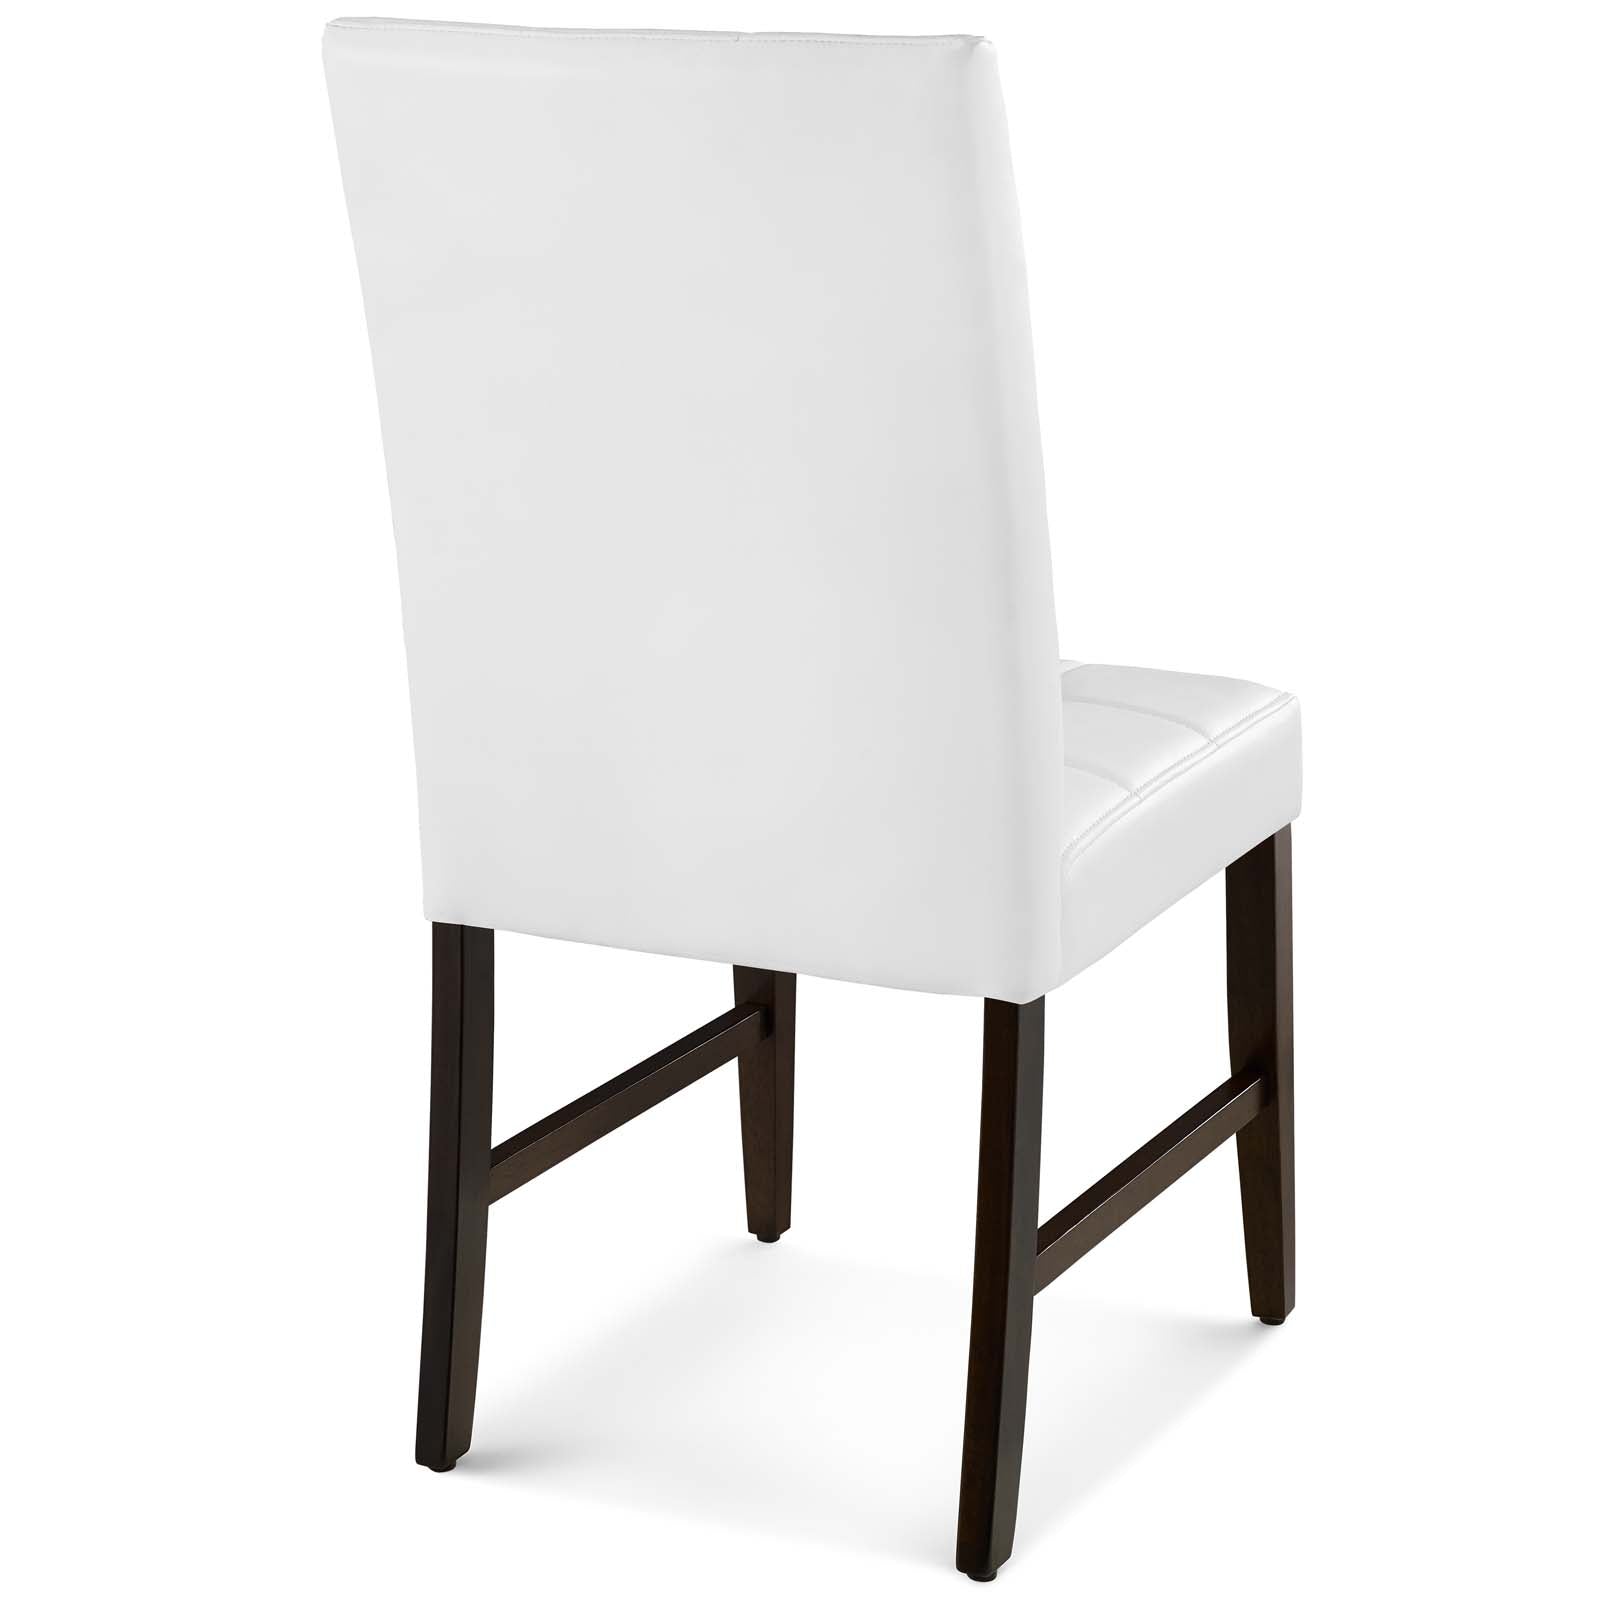 Modway Dining Chairs - Promulgate Biscuit Tufted Upholstered Faux Leather Dining Side Chair Set of 2 White